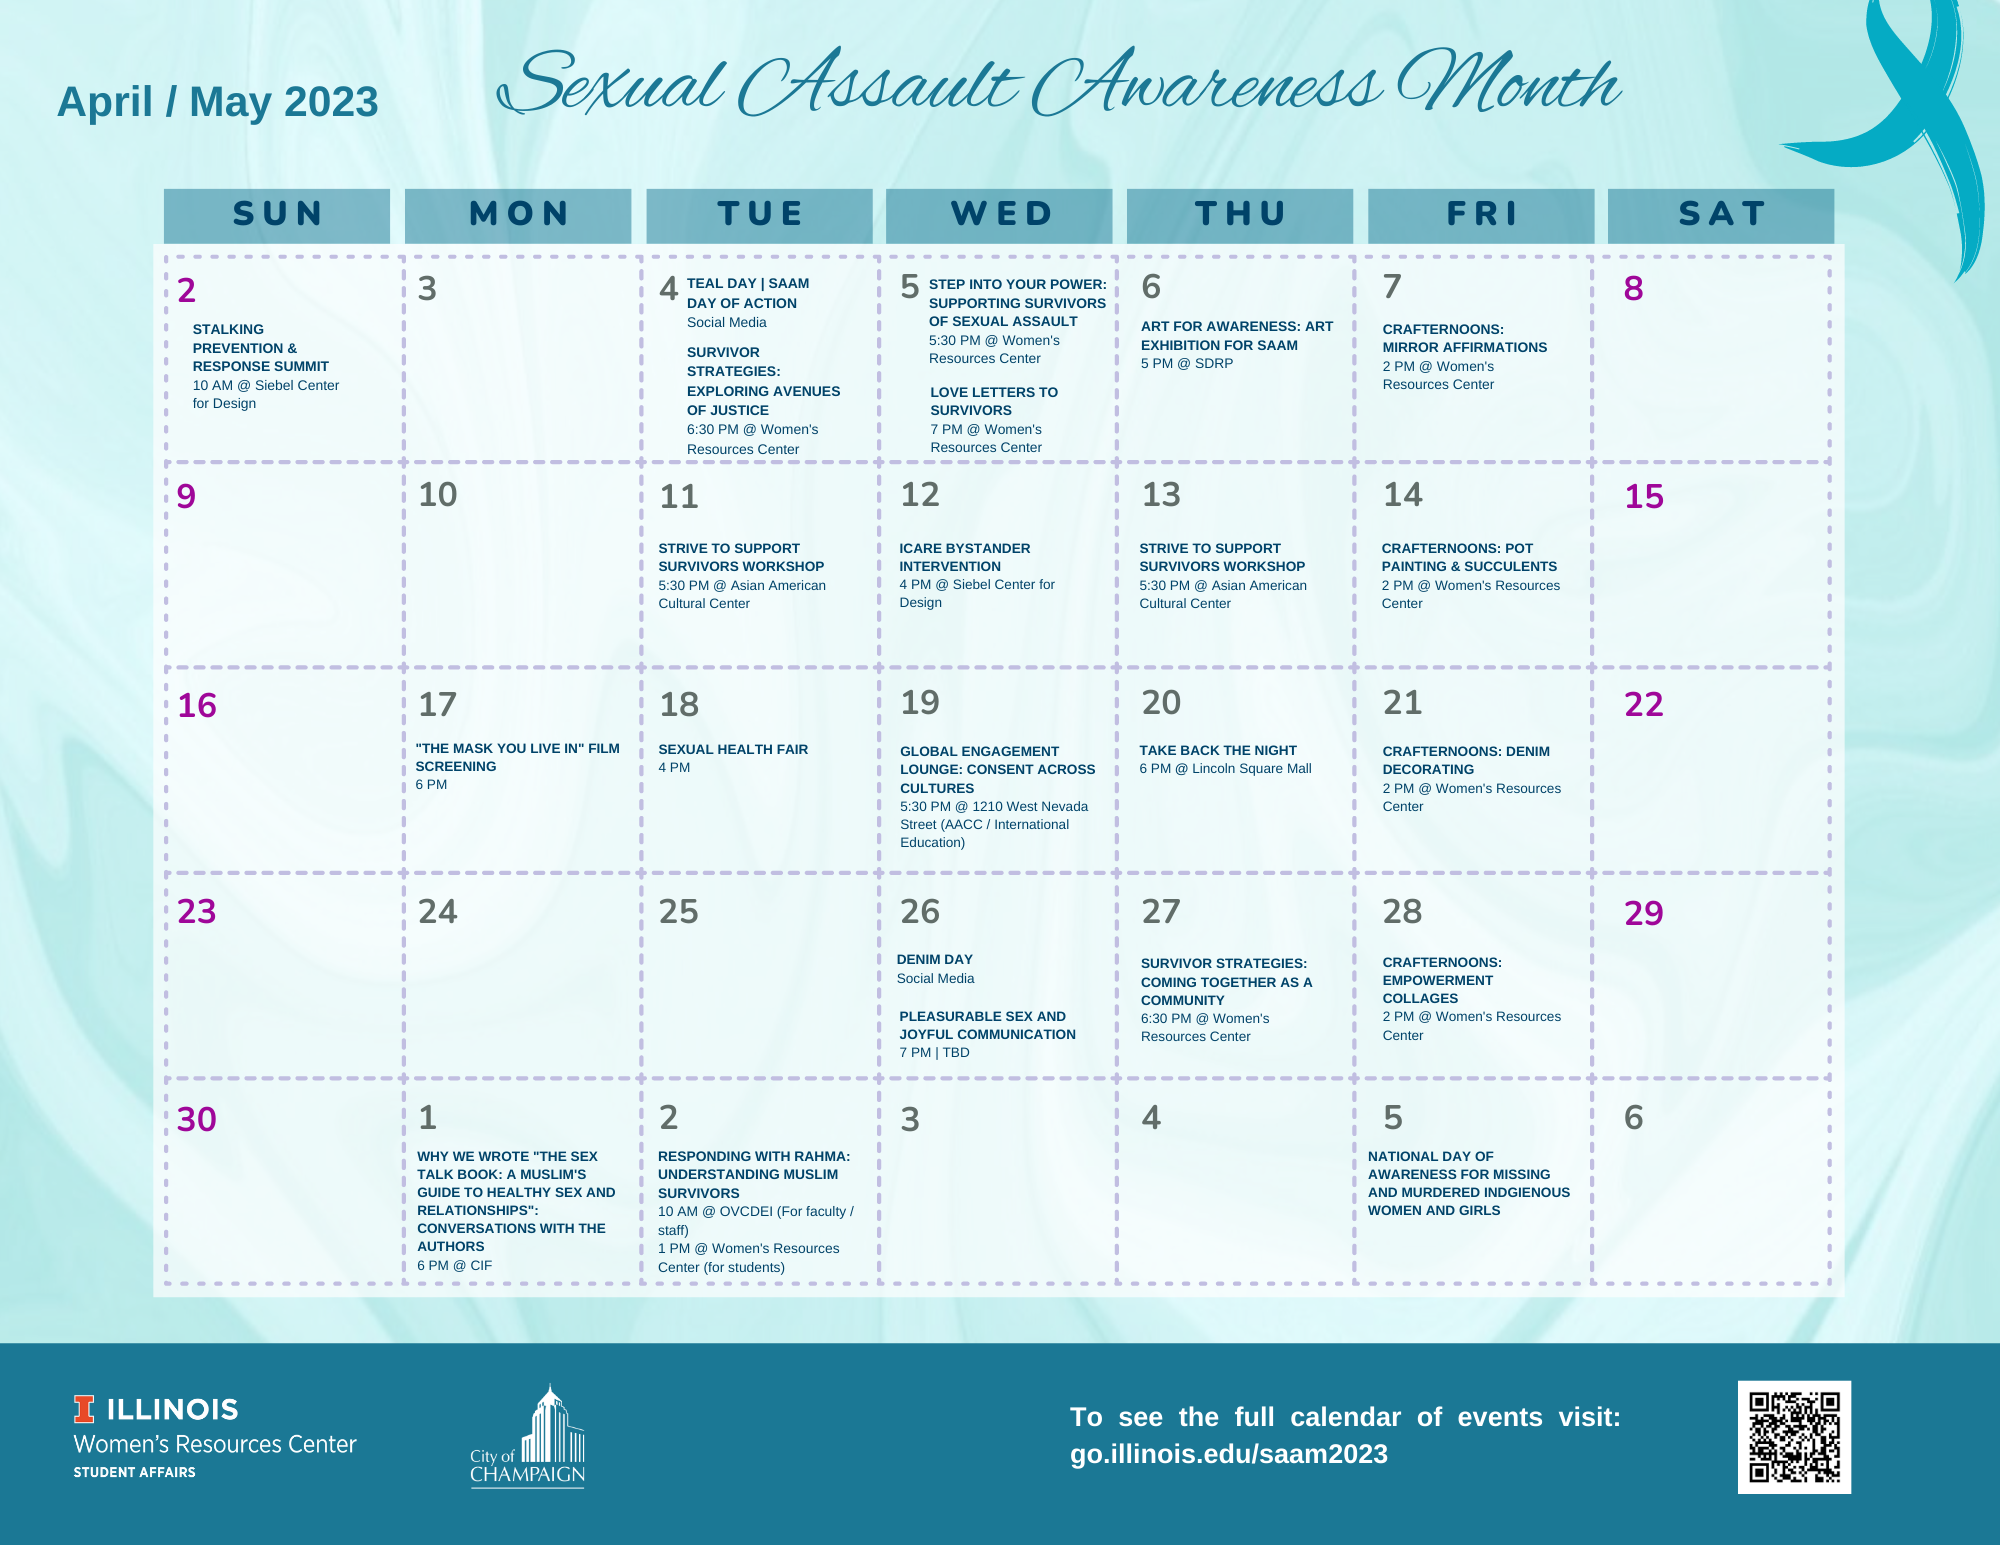 2023 Sexual Assault Awareness Month schedule poster with calendar grid and abstract blue background